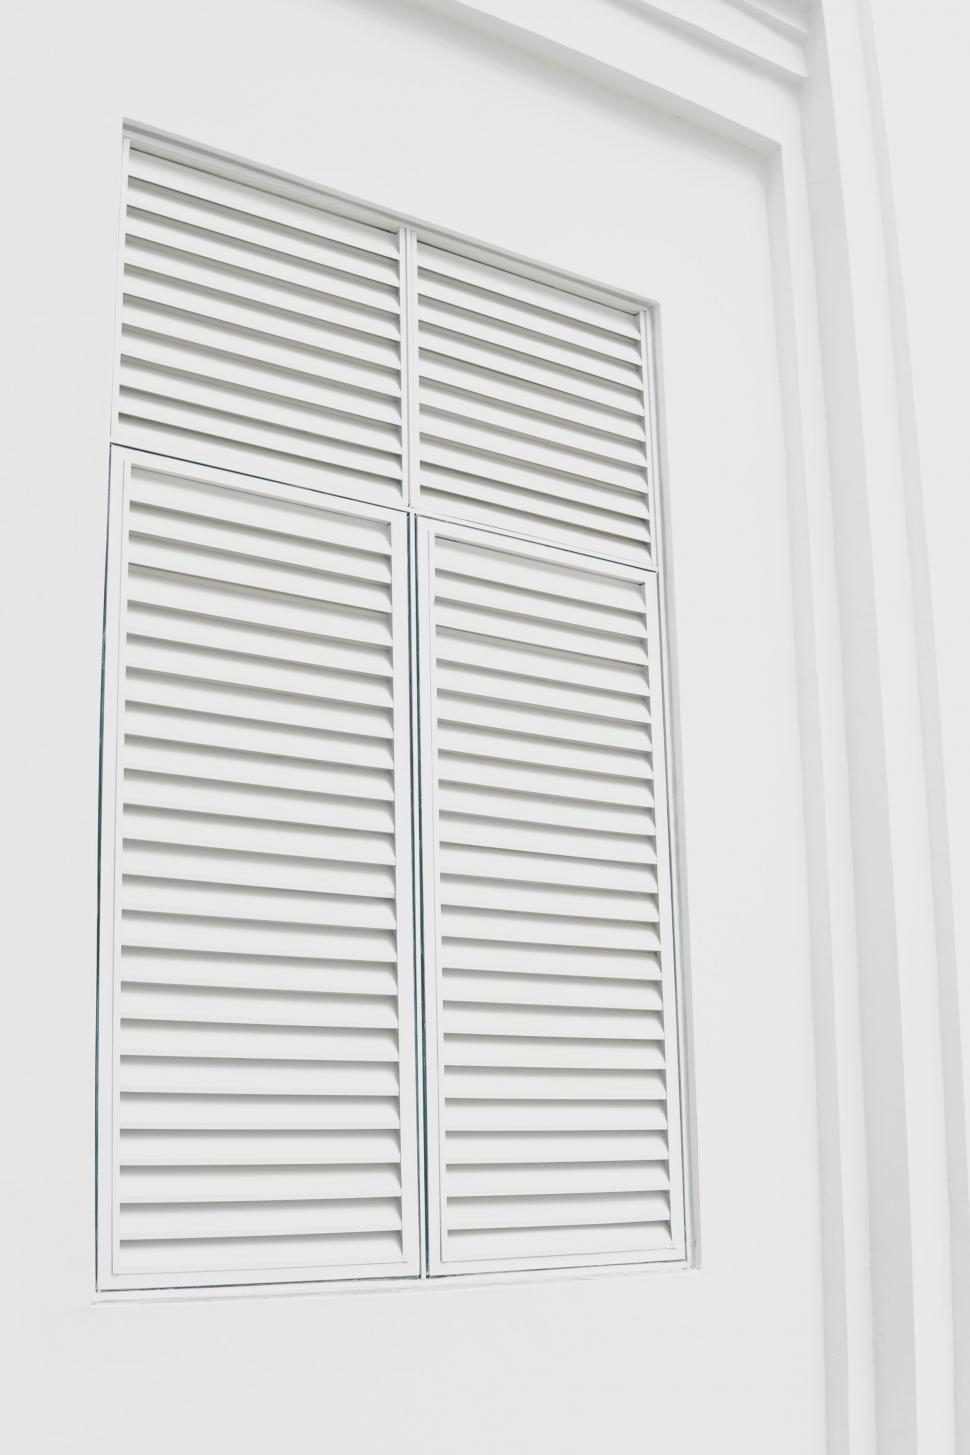 Free Image of White Window With Shutters on a White Wall 